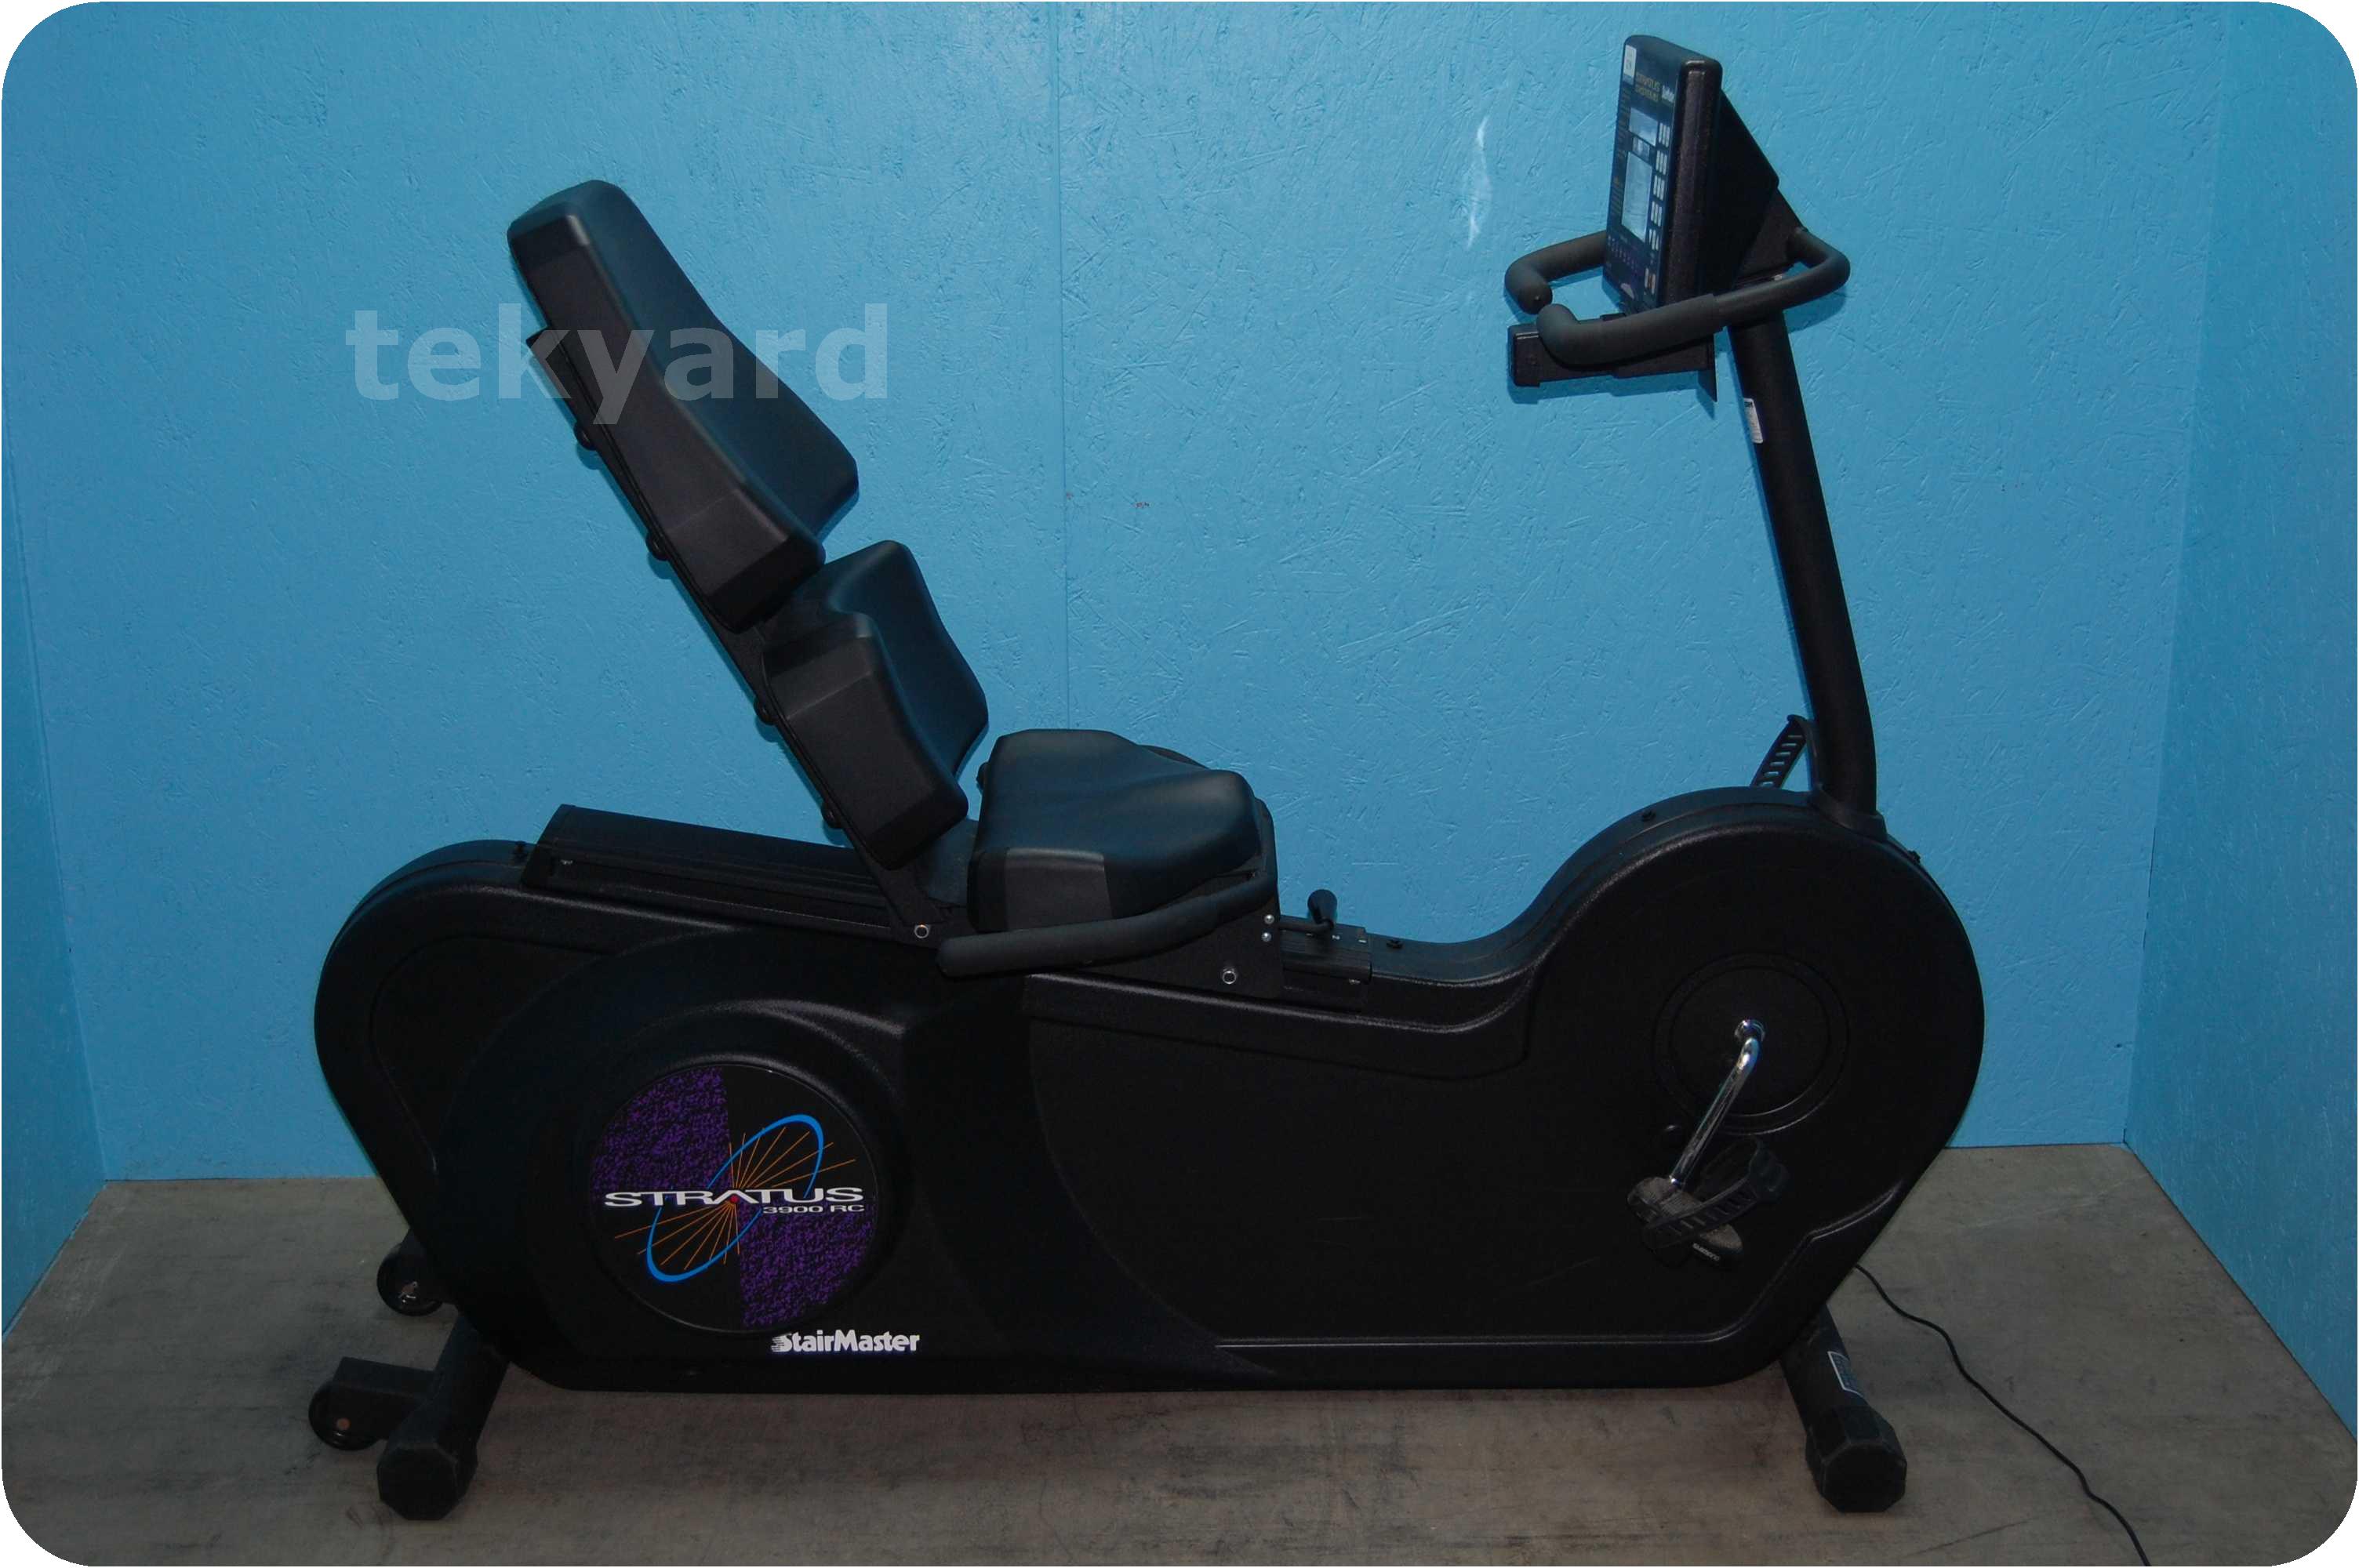 3900 Upright Bike Display Console Details about   StairMaster Stratus Systems 3300 